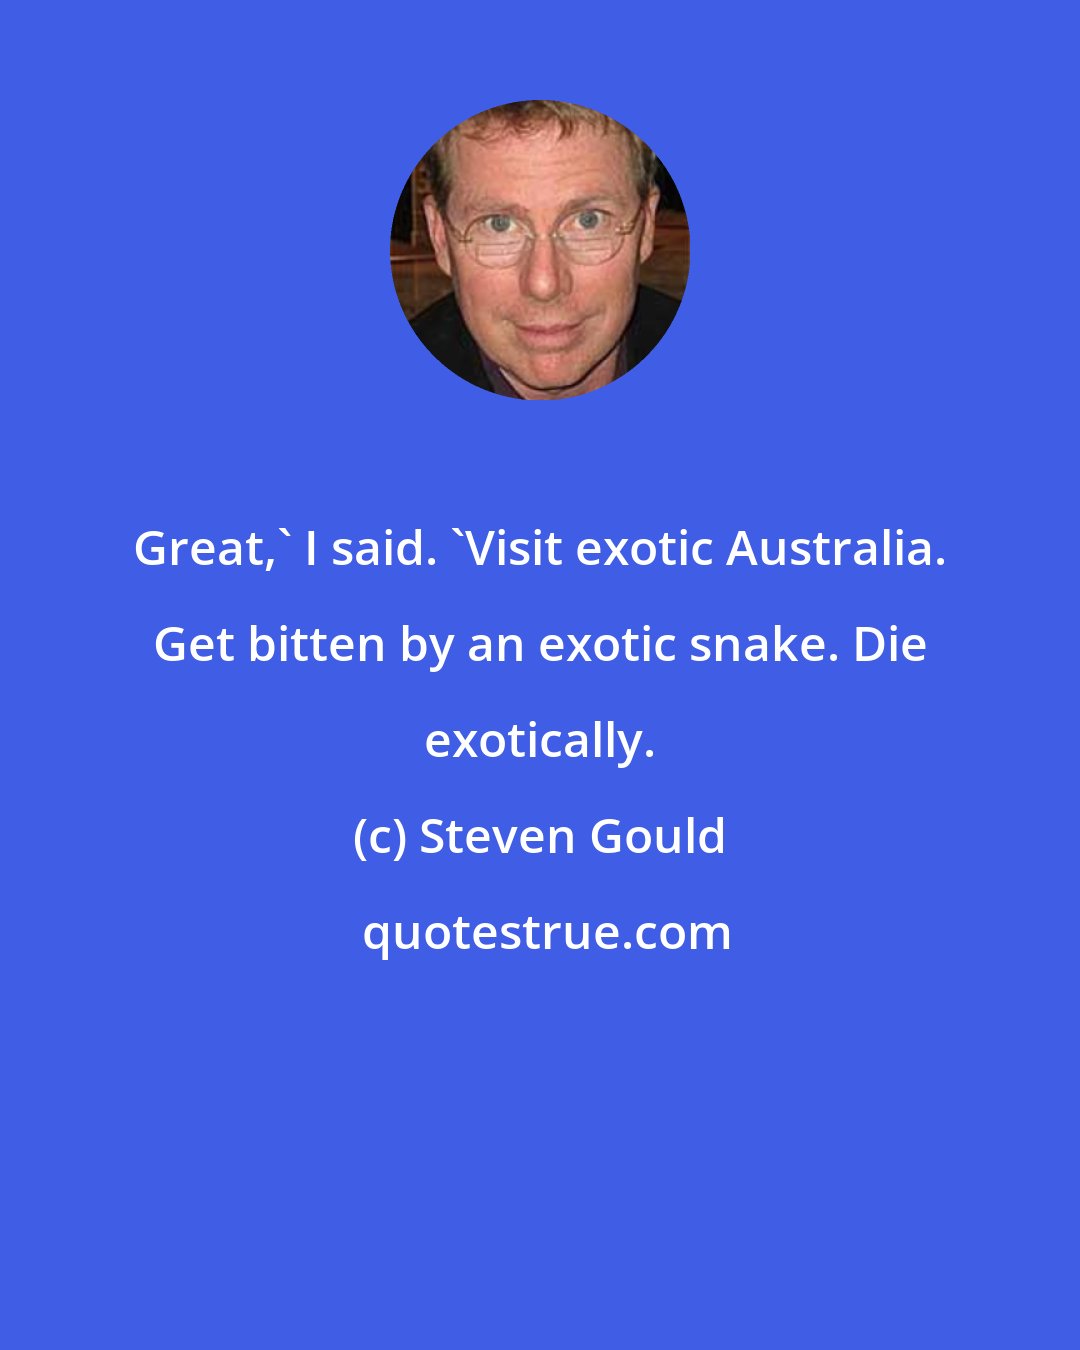 Steven Gould: Great,' I said. 'Visit exotic Australia. Get bitten by an exotic snake. Die exotically.